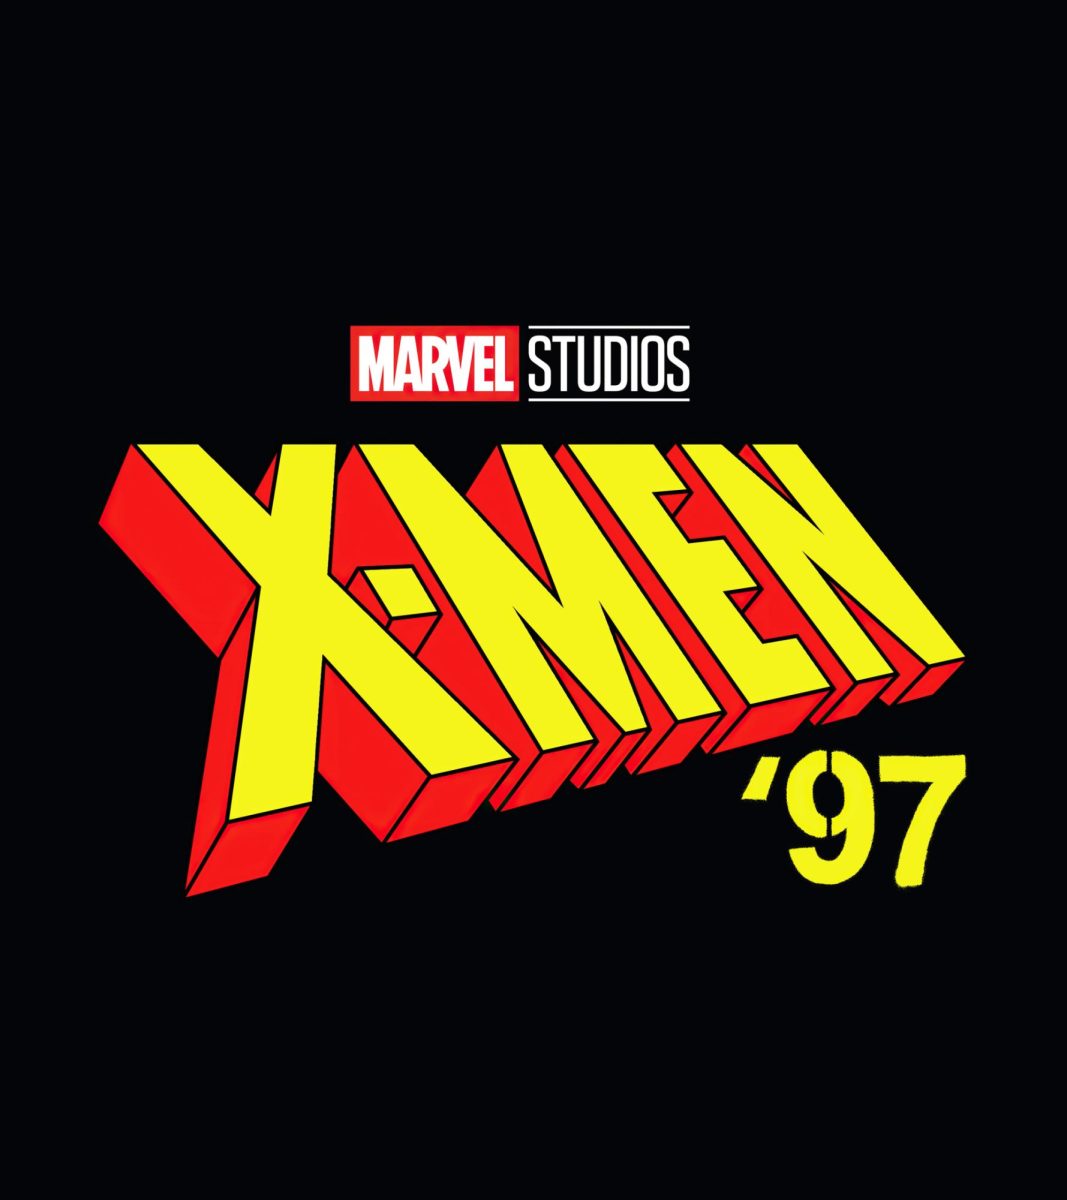 X-Men+97+was+way+better+than+expected+and+brought+a+lot+to+the+table.